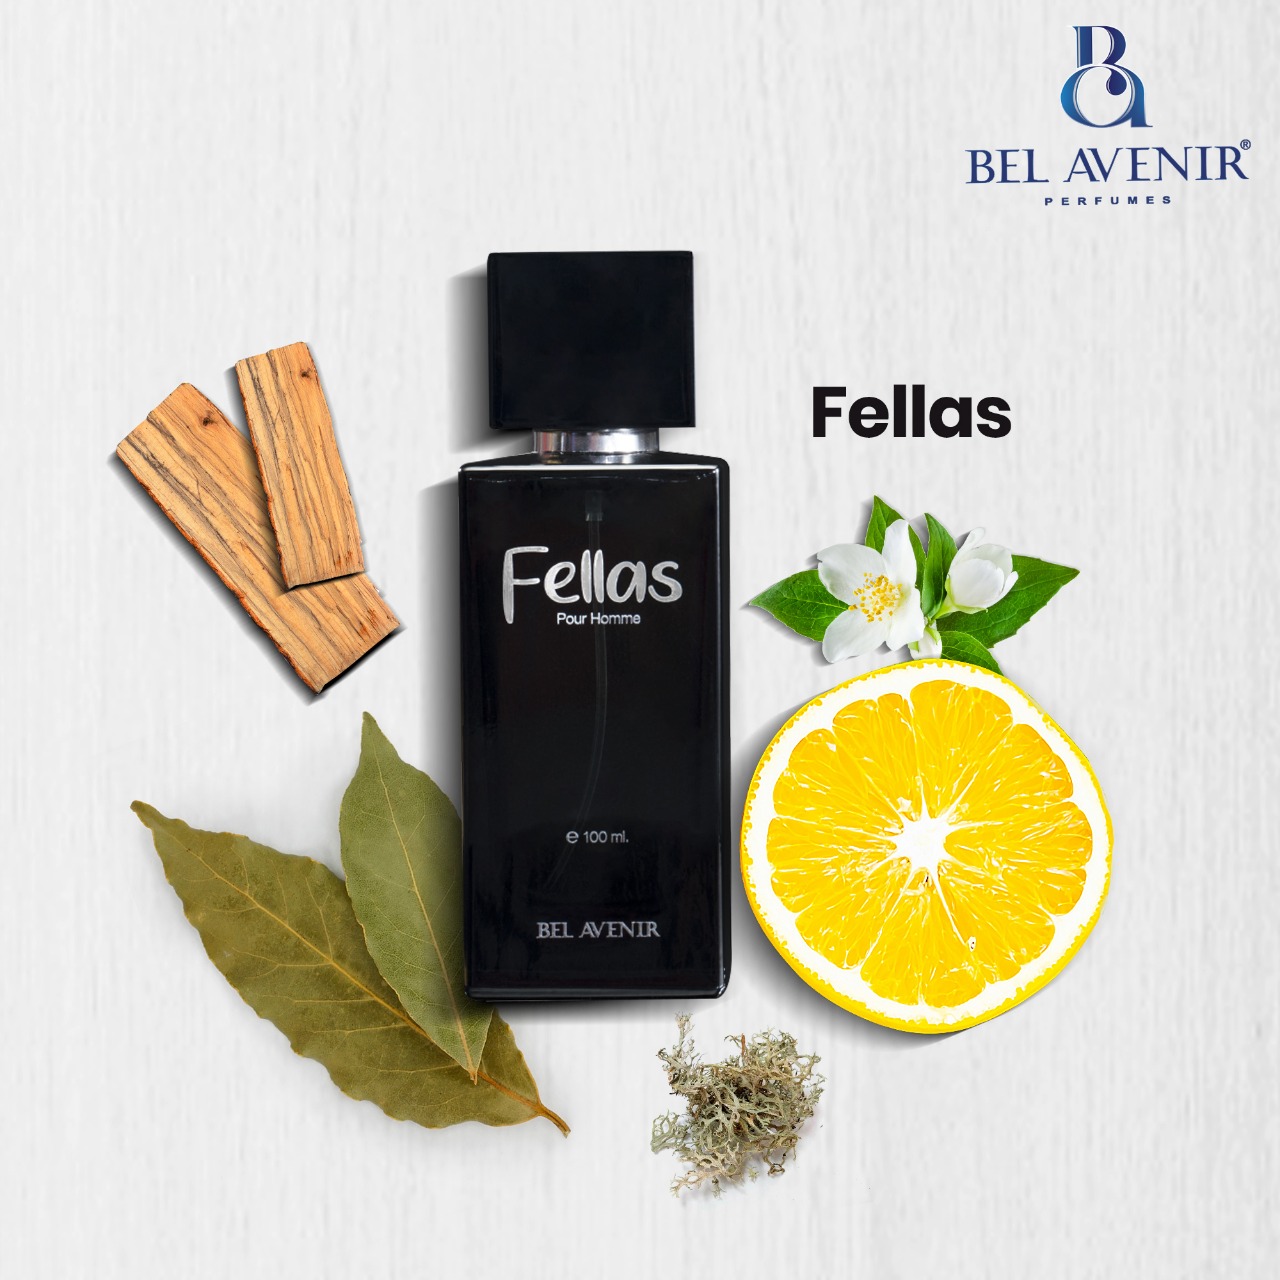 Fellas Perfume for Men by Belavenir perfumes has the most refreshingly , rewarding scent and its perfect for those Men who takes on every day with gusto,who loves and lives everyday with enthusiasm. The very sweet hesperidic, succulent, juicy, honeyed yet sensual and floral fragrance of Mandarin Orange in Fellas perfume by Bel Avenir’s is perfect Scent for relaxing and calming your mind. . . Plus the Patchouli in it provide strong, slightly sweet, intoxicating dark, musky-earthy aroma profile. .